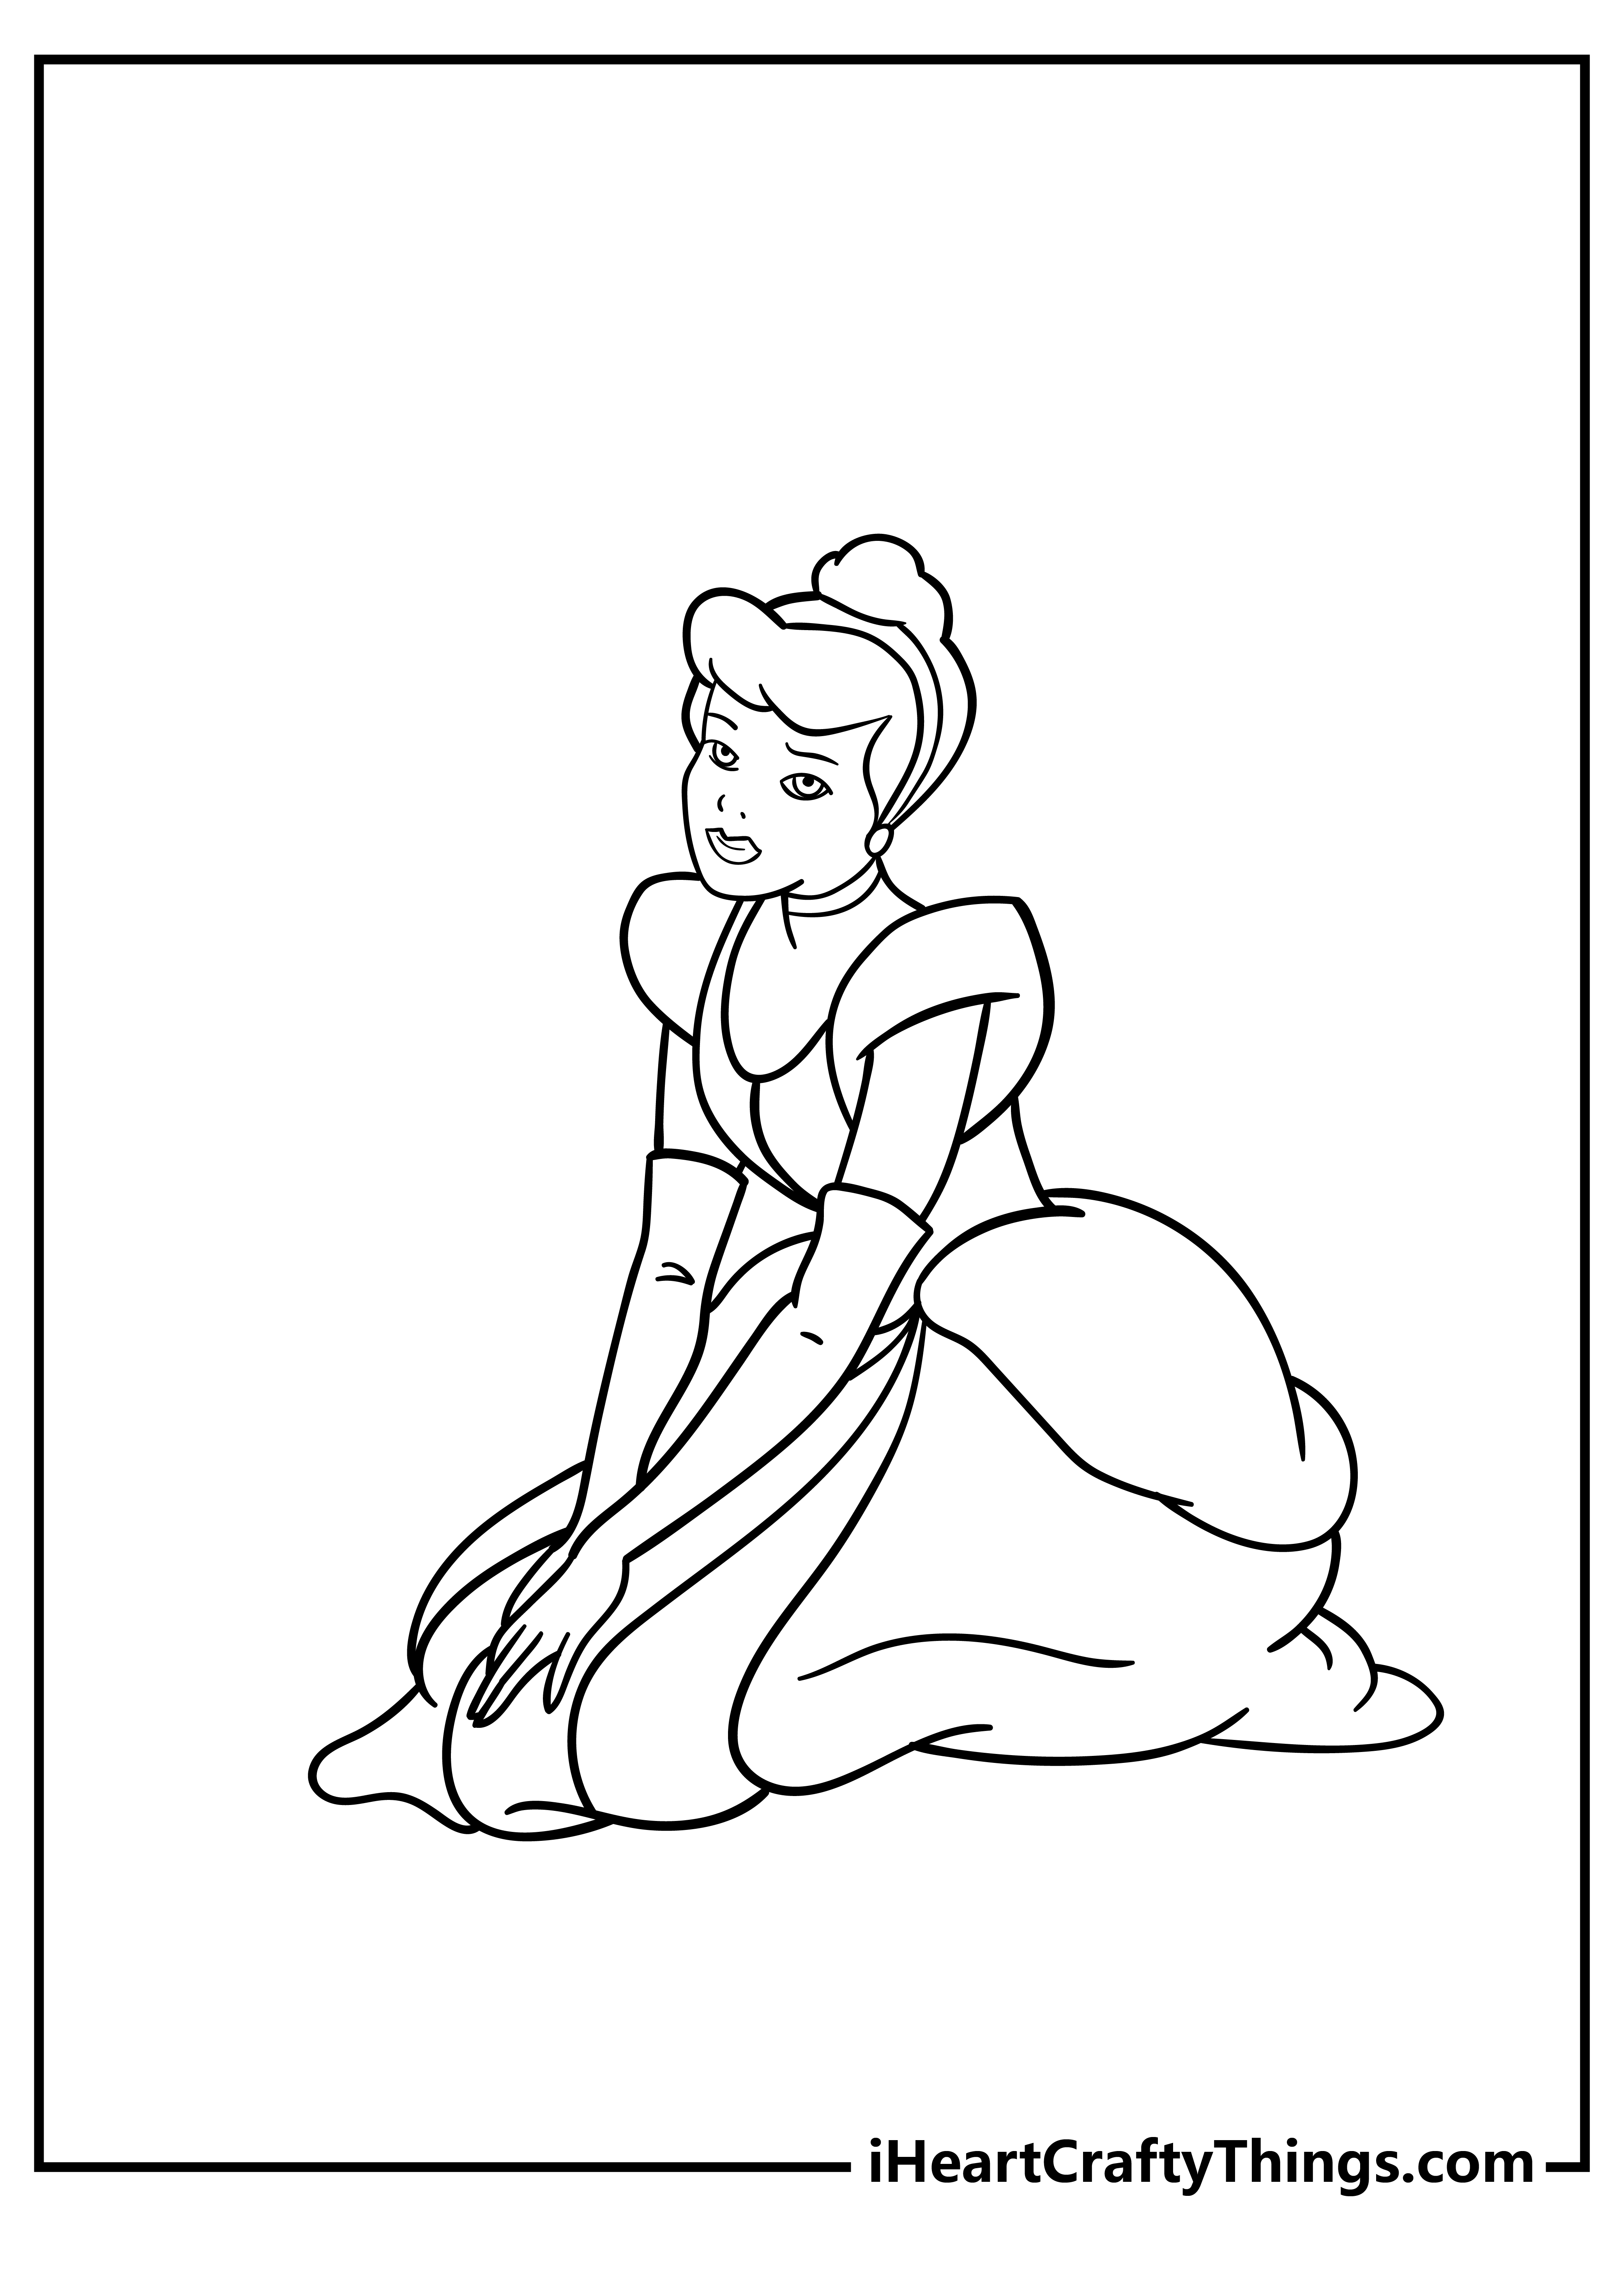 Cinderella Coloring Pages for kids free download